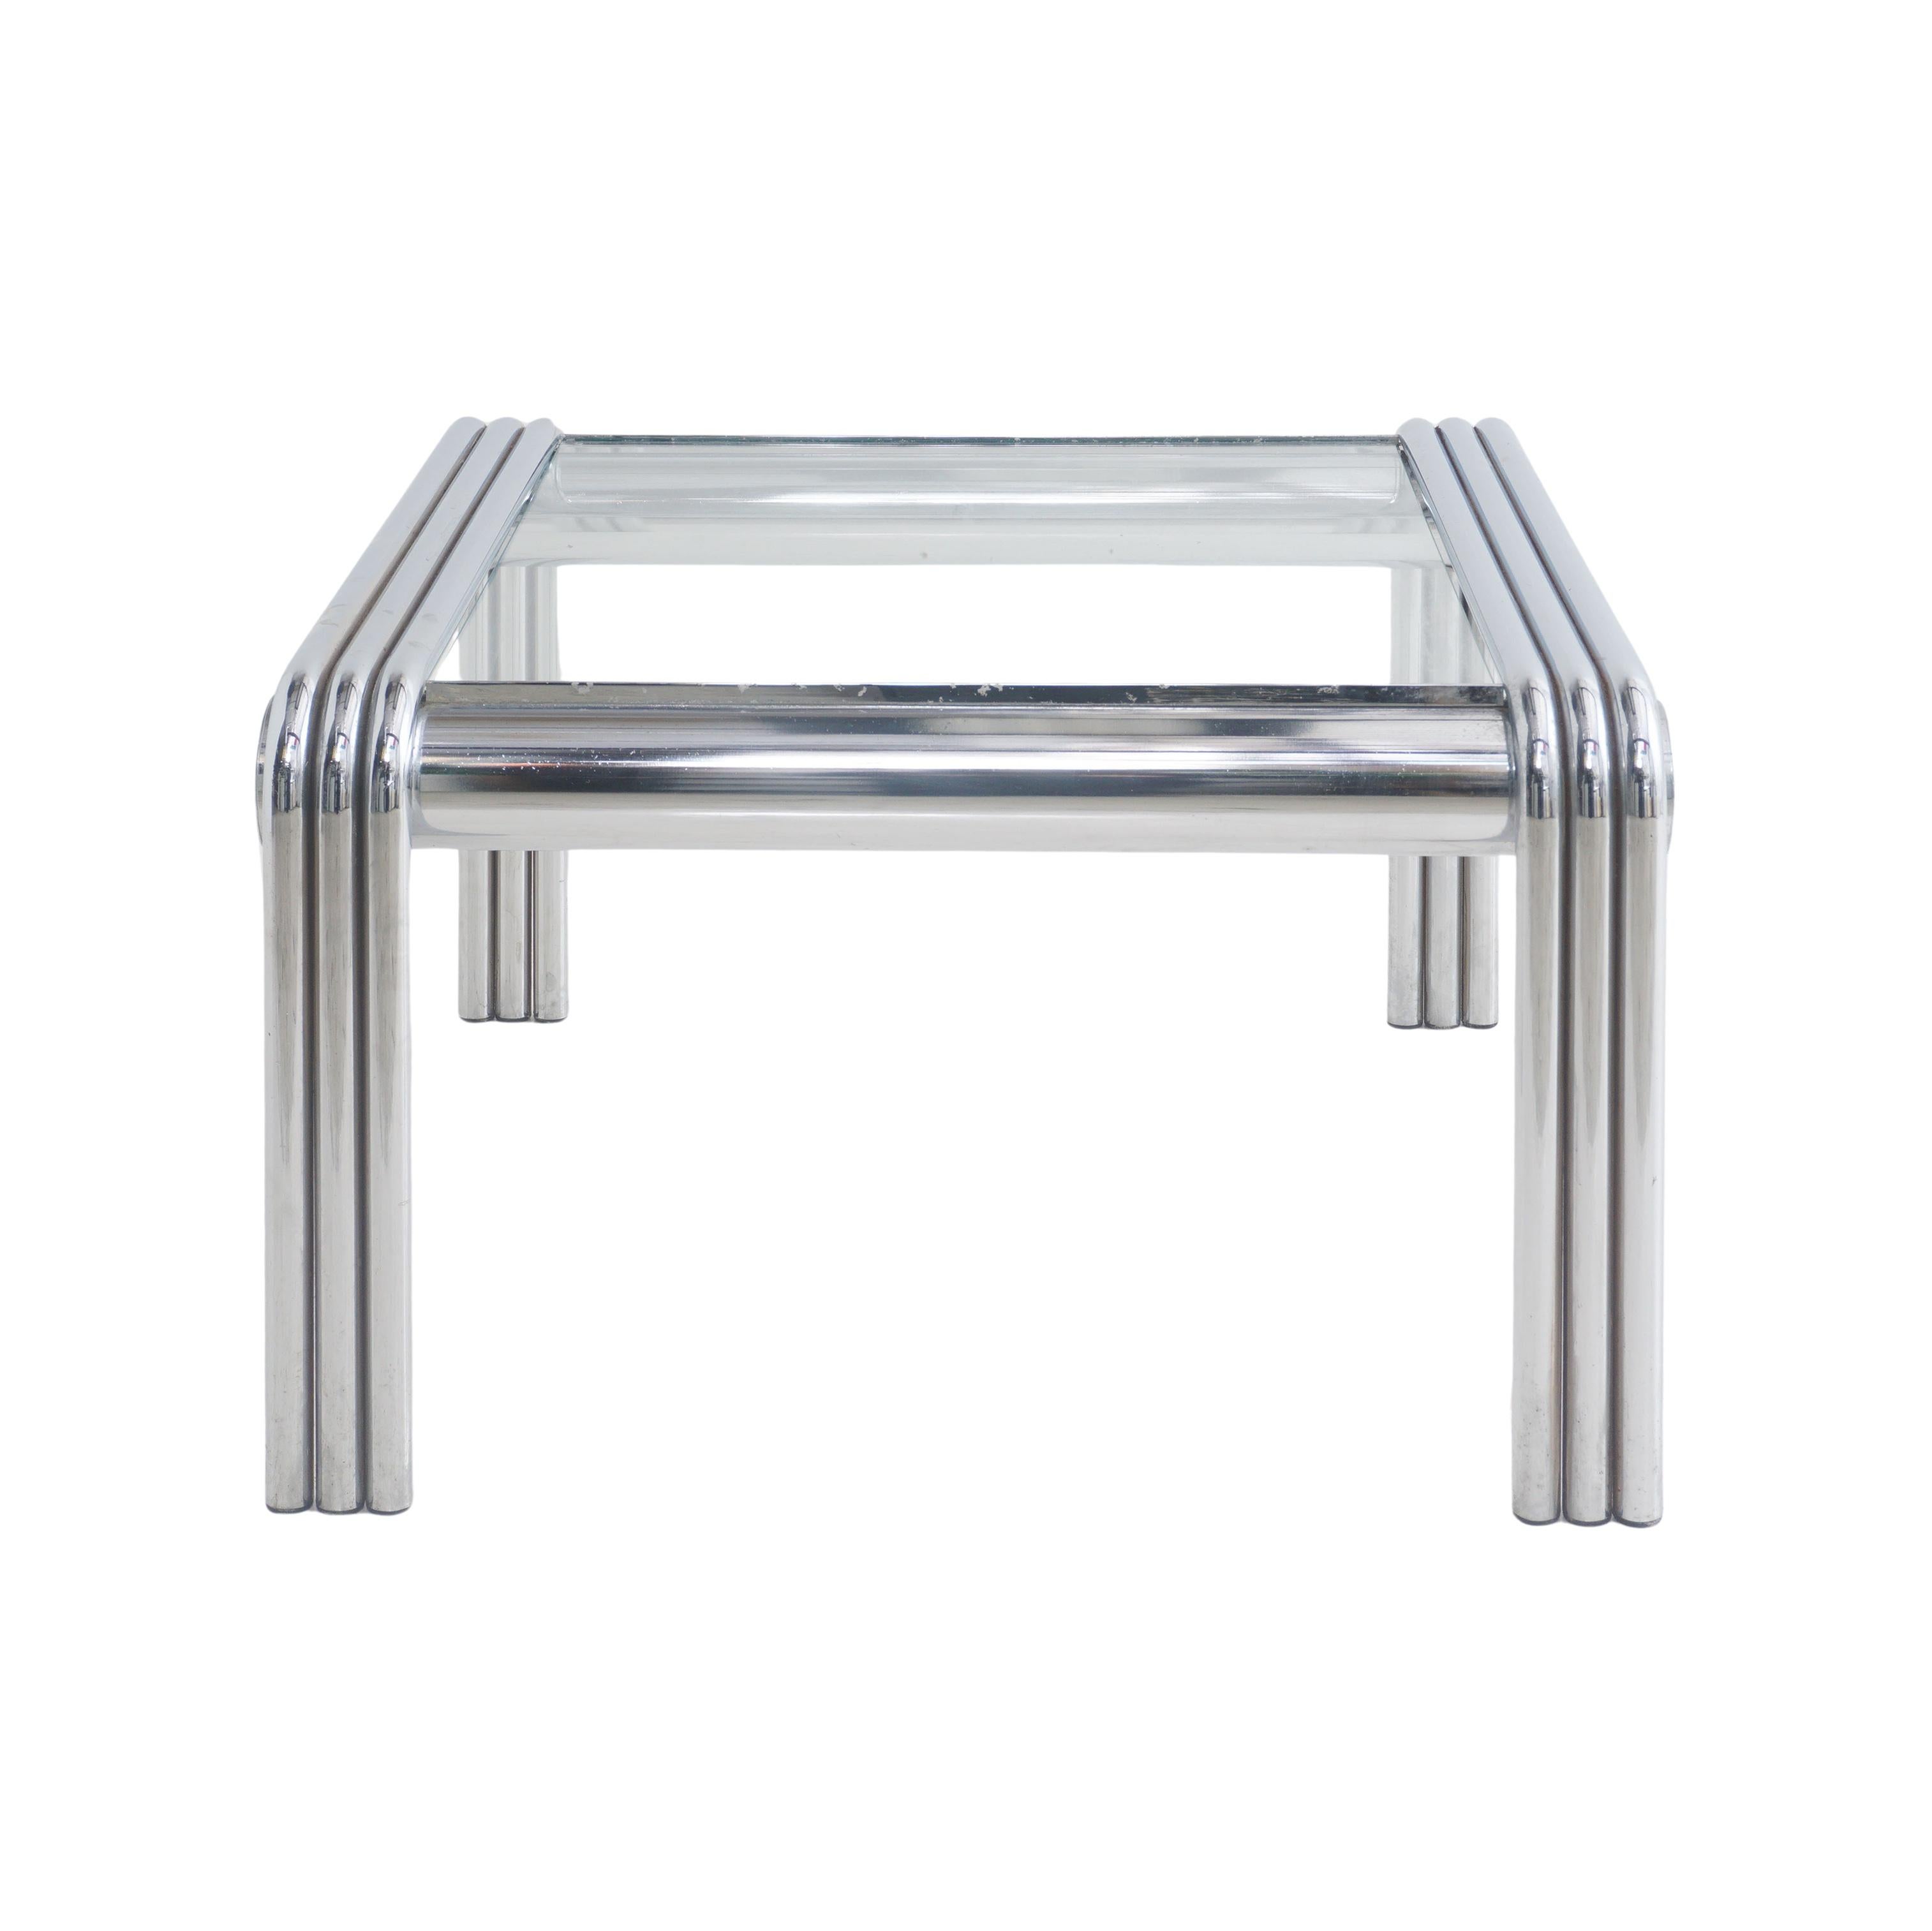 Behold, the tubular chrome and glass side table from the tumultuous 1970s! With its chrome legs like the limbs of a mechanical insect, it stands as a testament to the era's fusion of art and technology. The glass top, a fragile portal to another